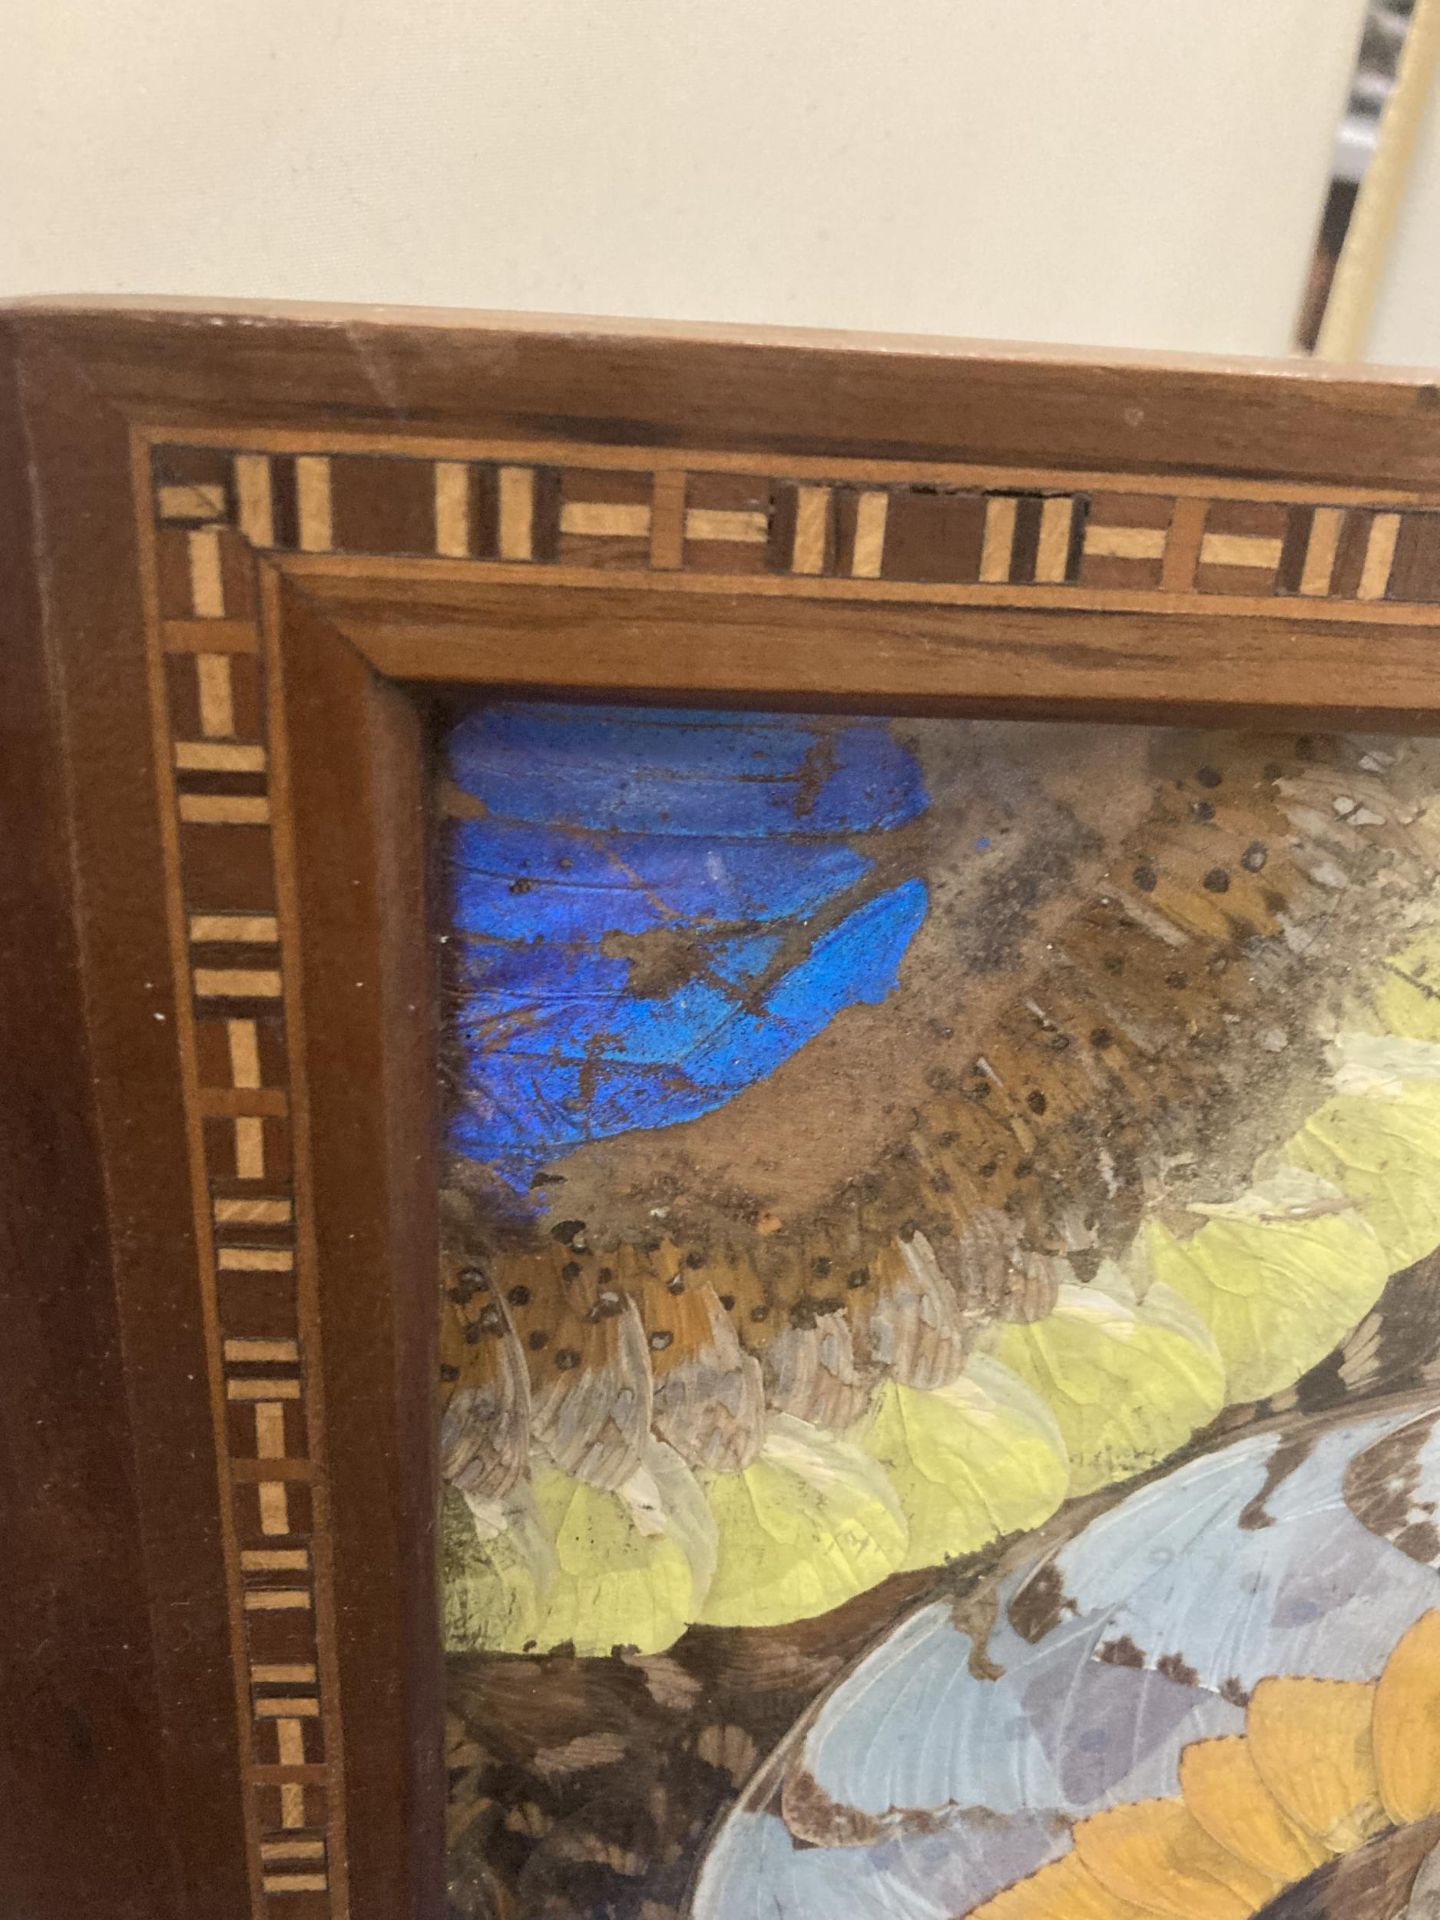 A VINTAGE INLAID WOODEN TRAY WITH BUTTERFLIES - Image 4 of 4